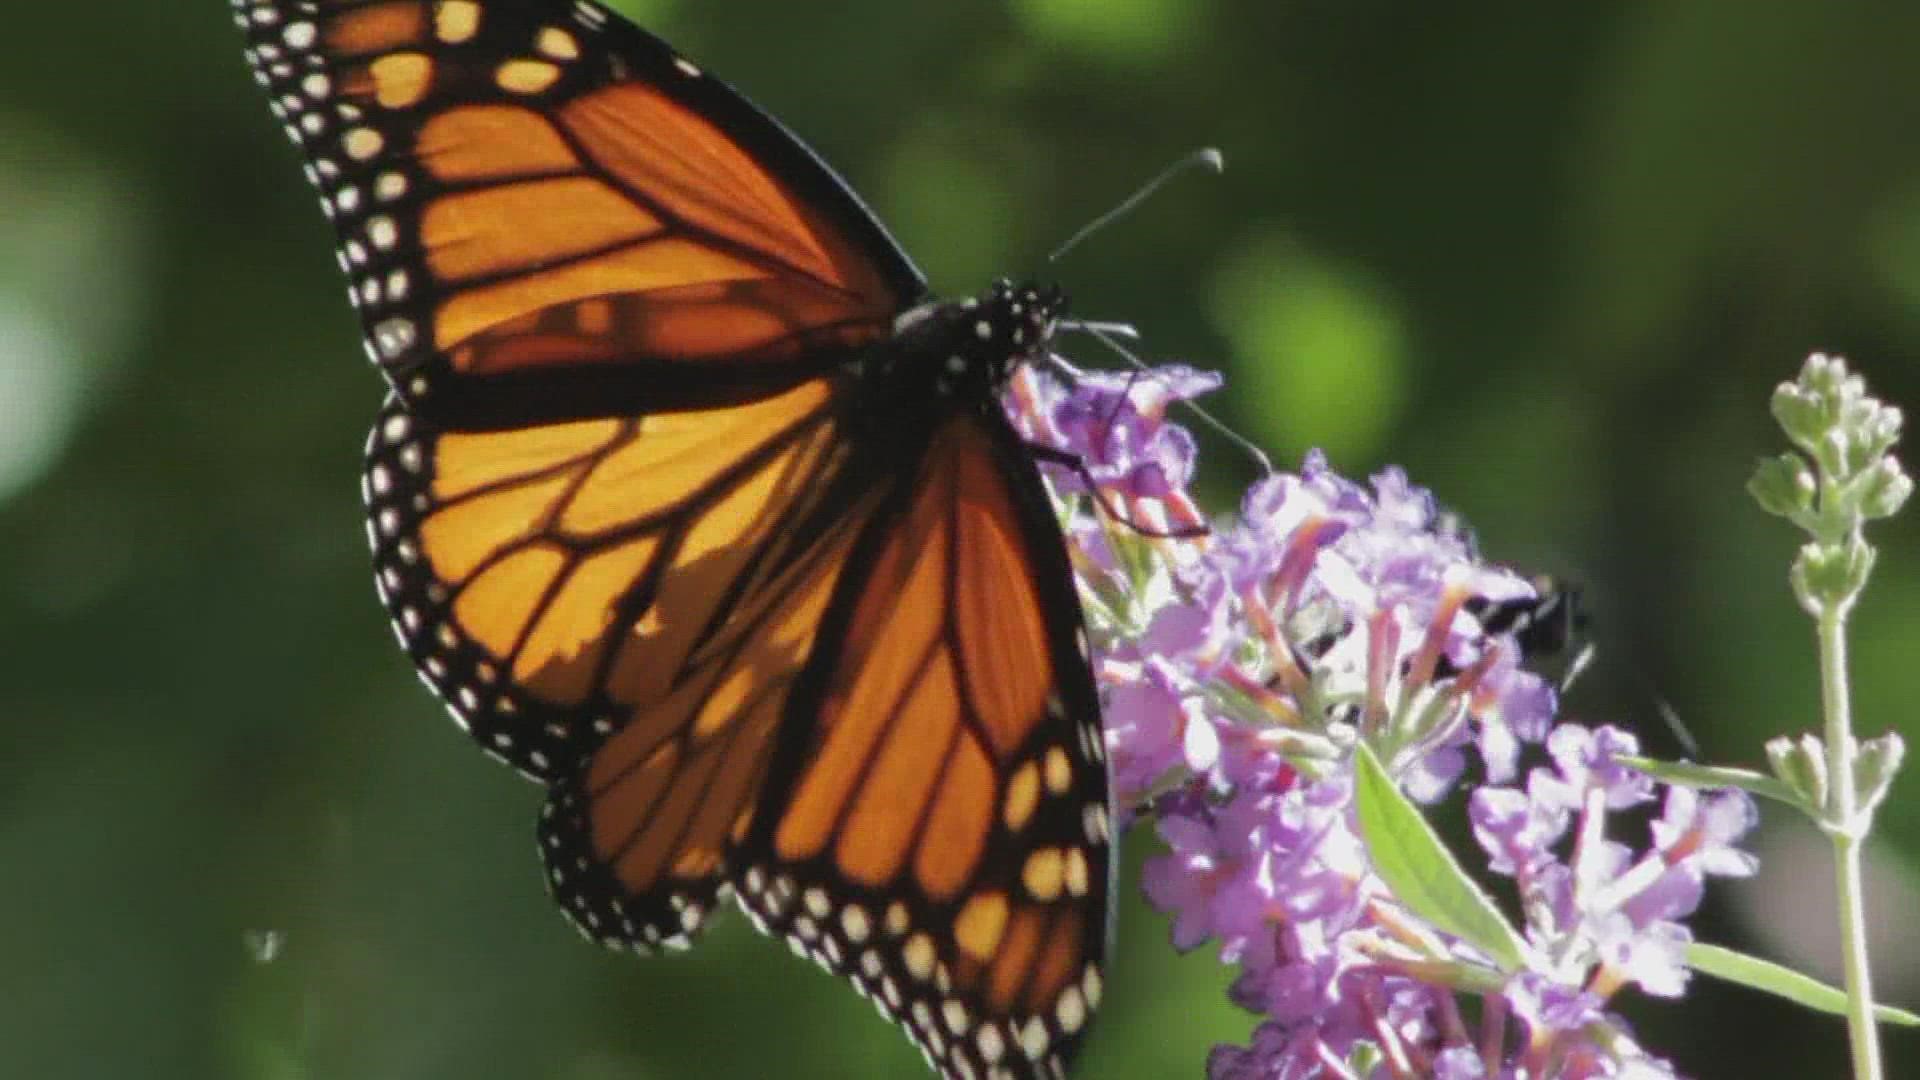 Chris Eckles from the Blank Park Zoo talks about Monarch Day Saturday (9/11/21) and how important planting butterfly/pollinator gardens are to a variety of wildlife.